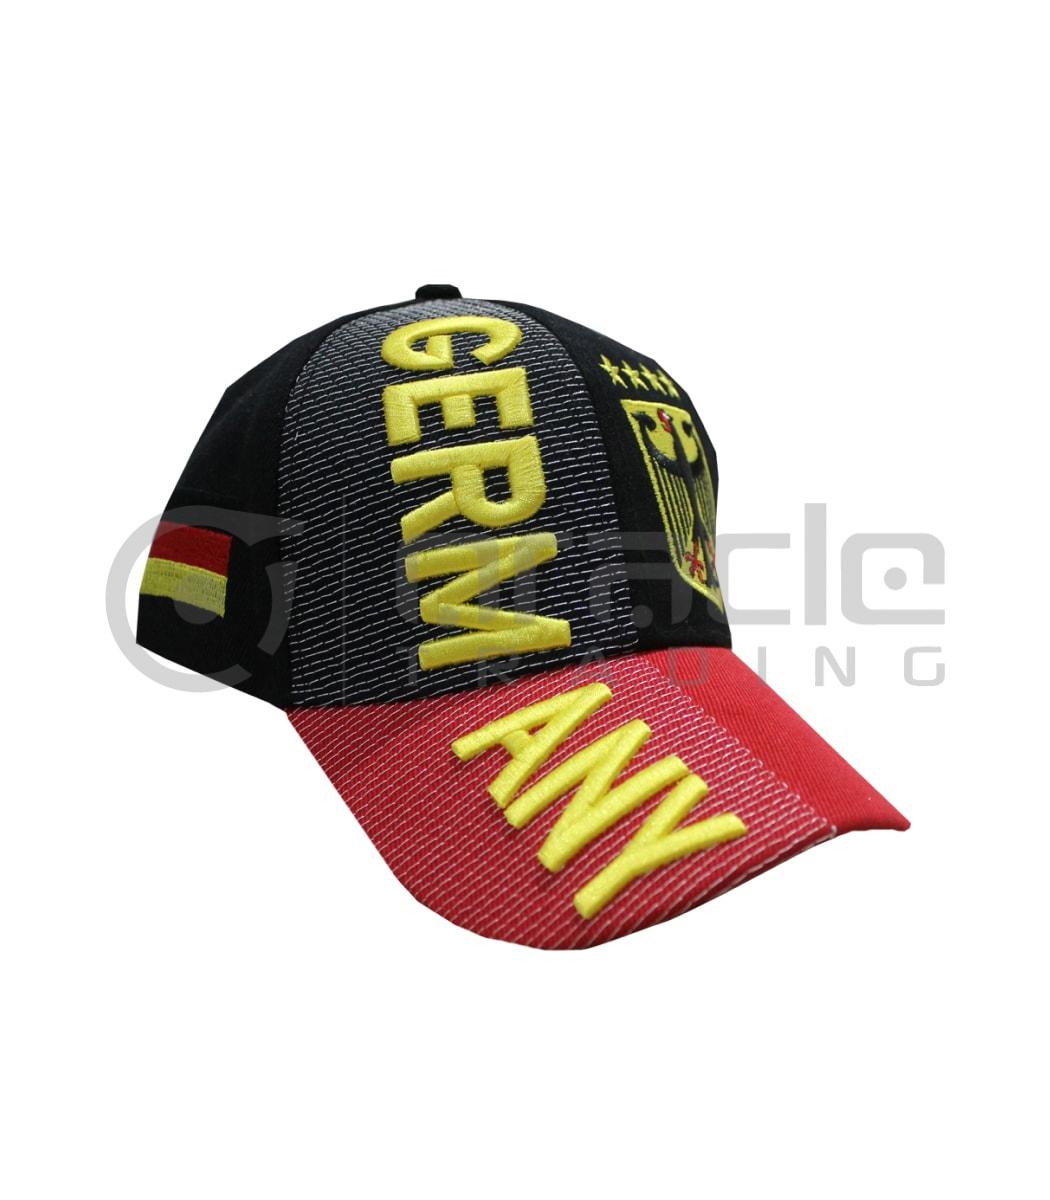 3D Germany Hat - Gold